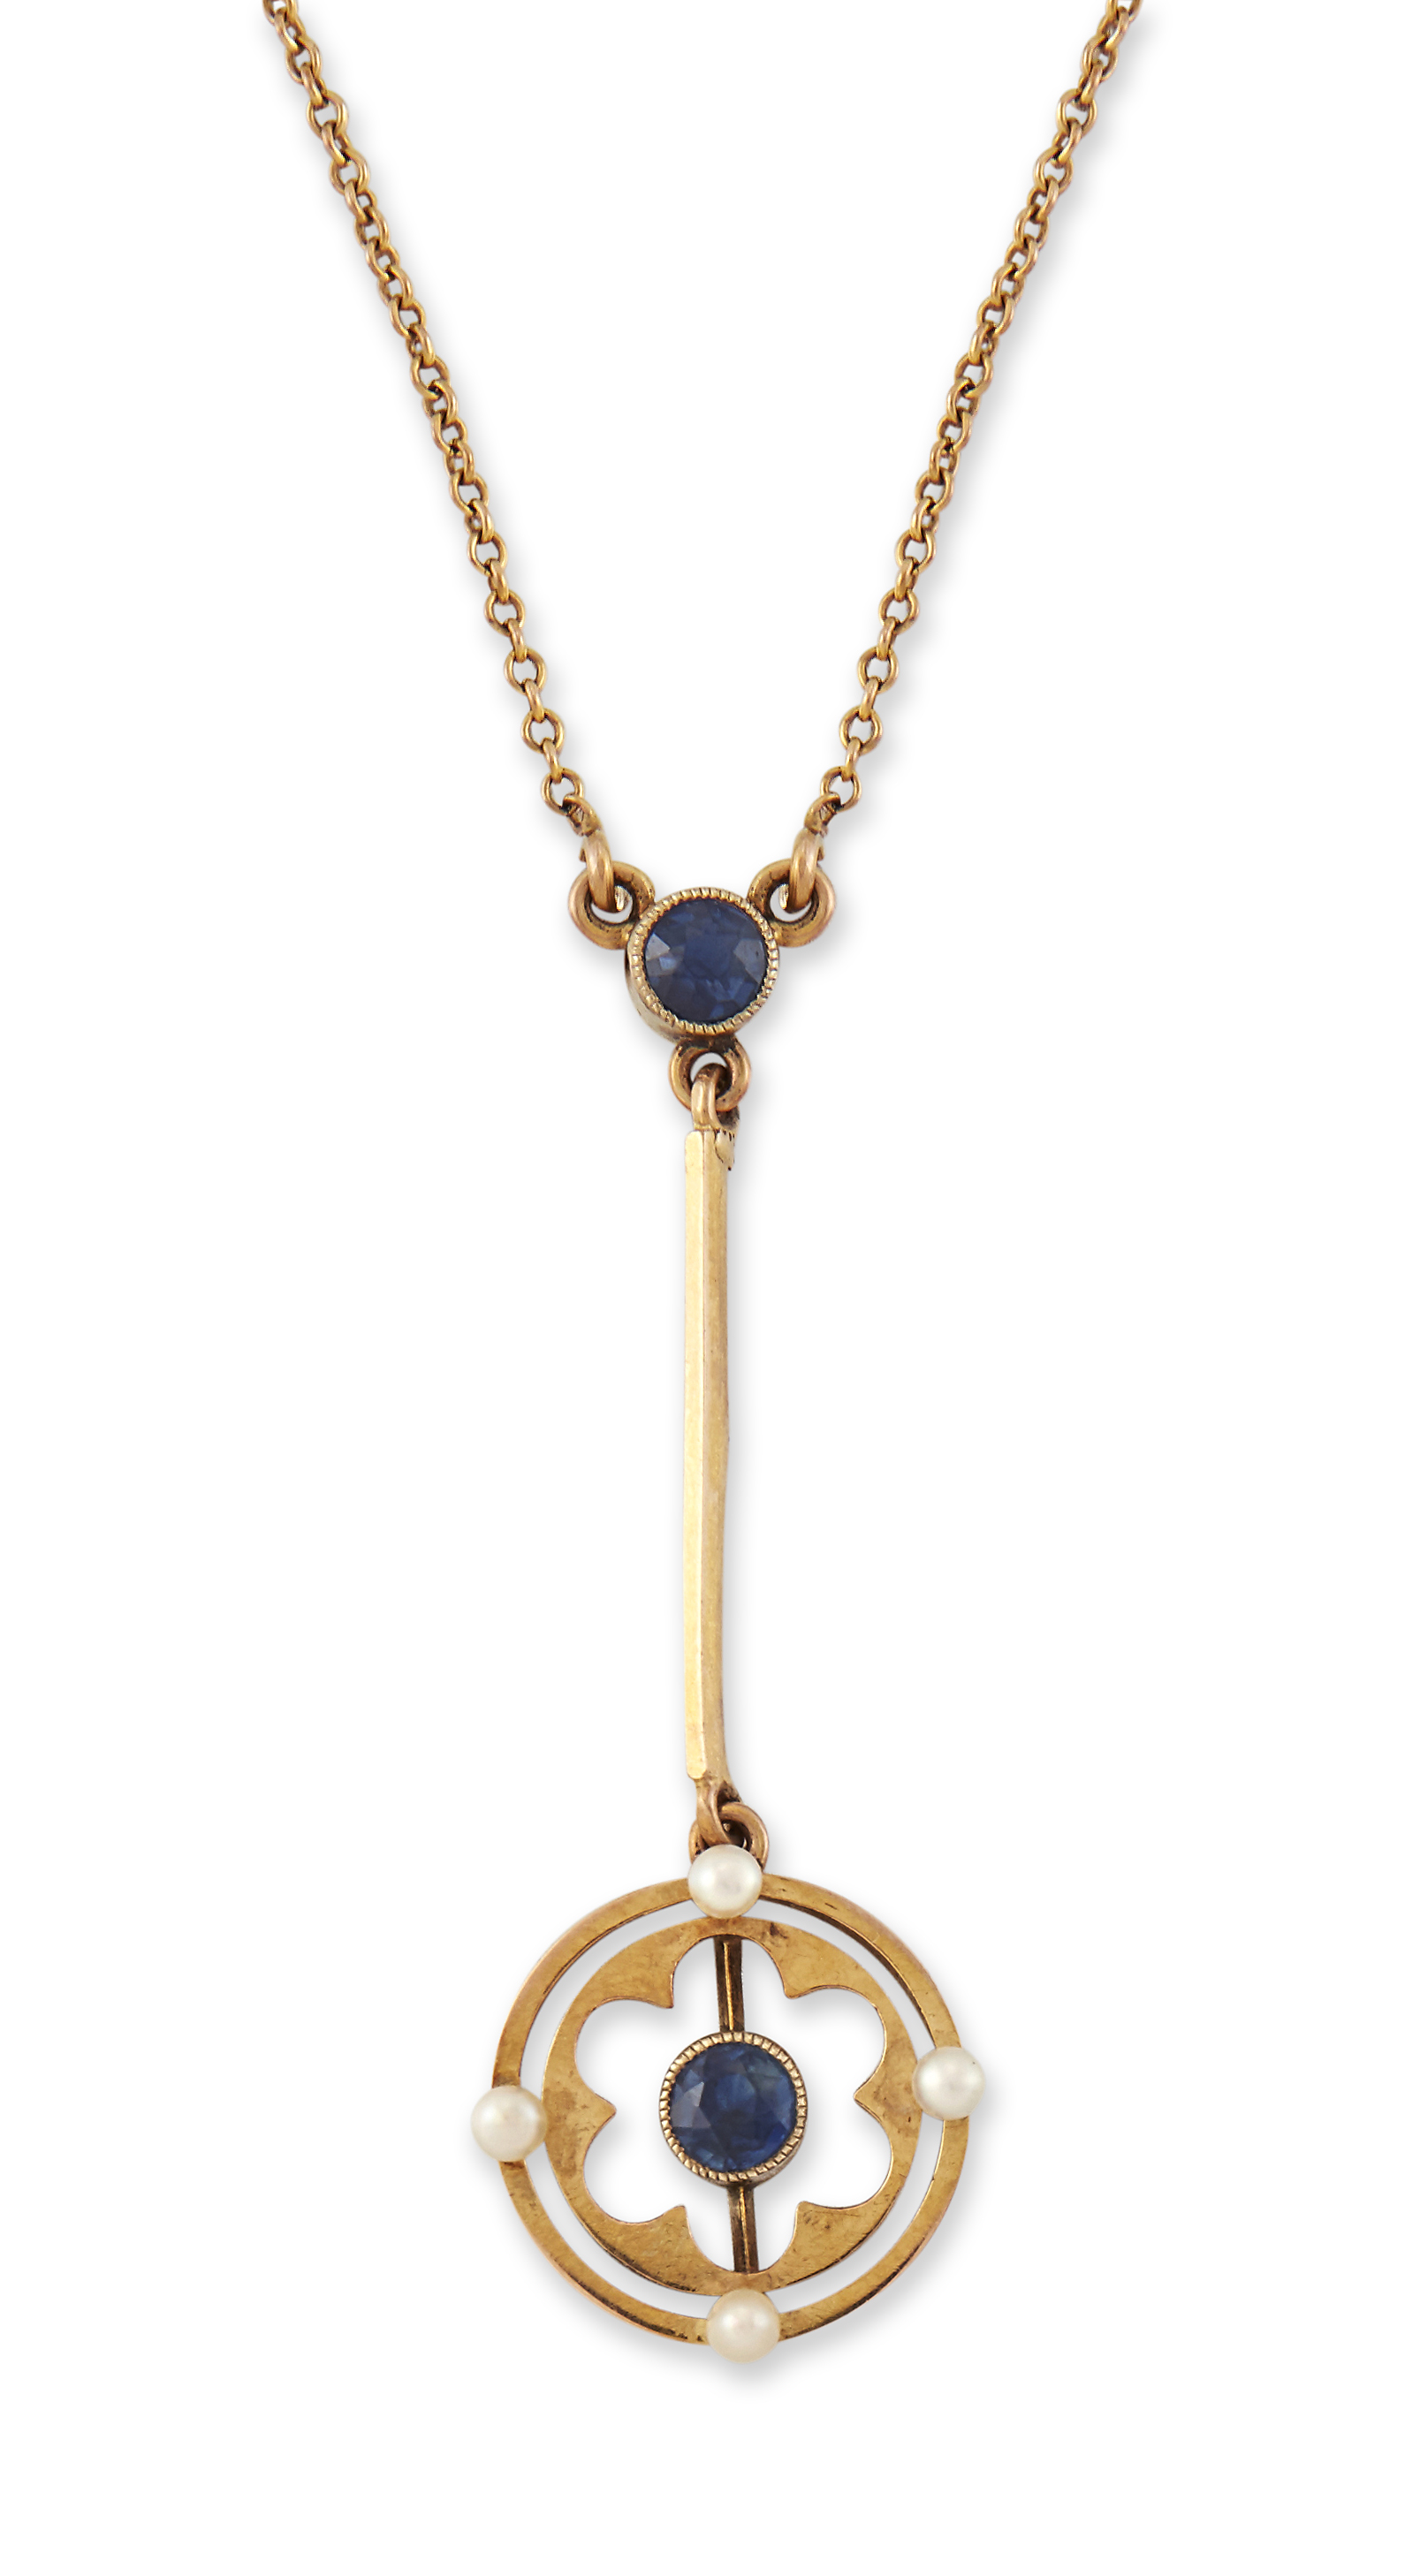 A SAPPHIRE AND SEED PEARL PENDANT NECKLACE